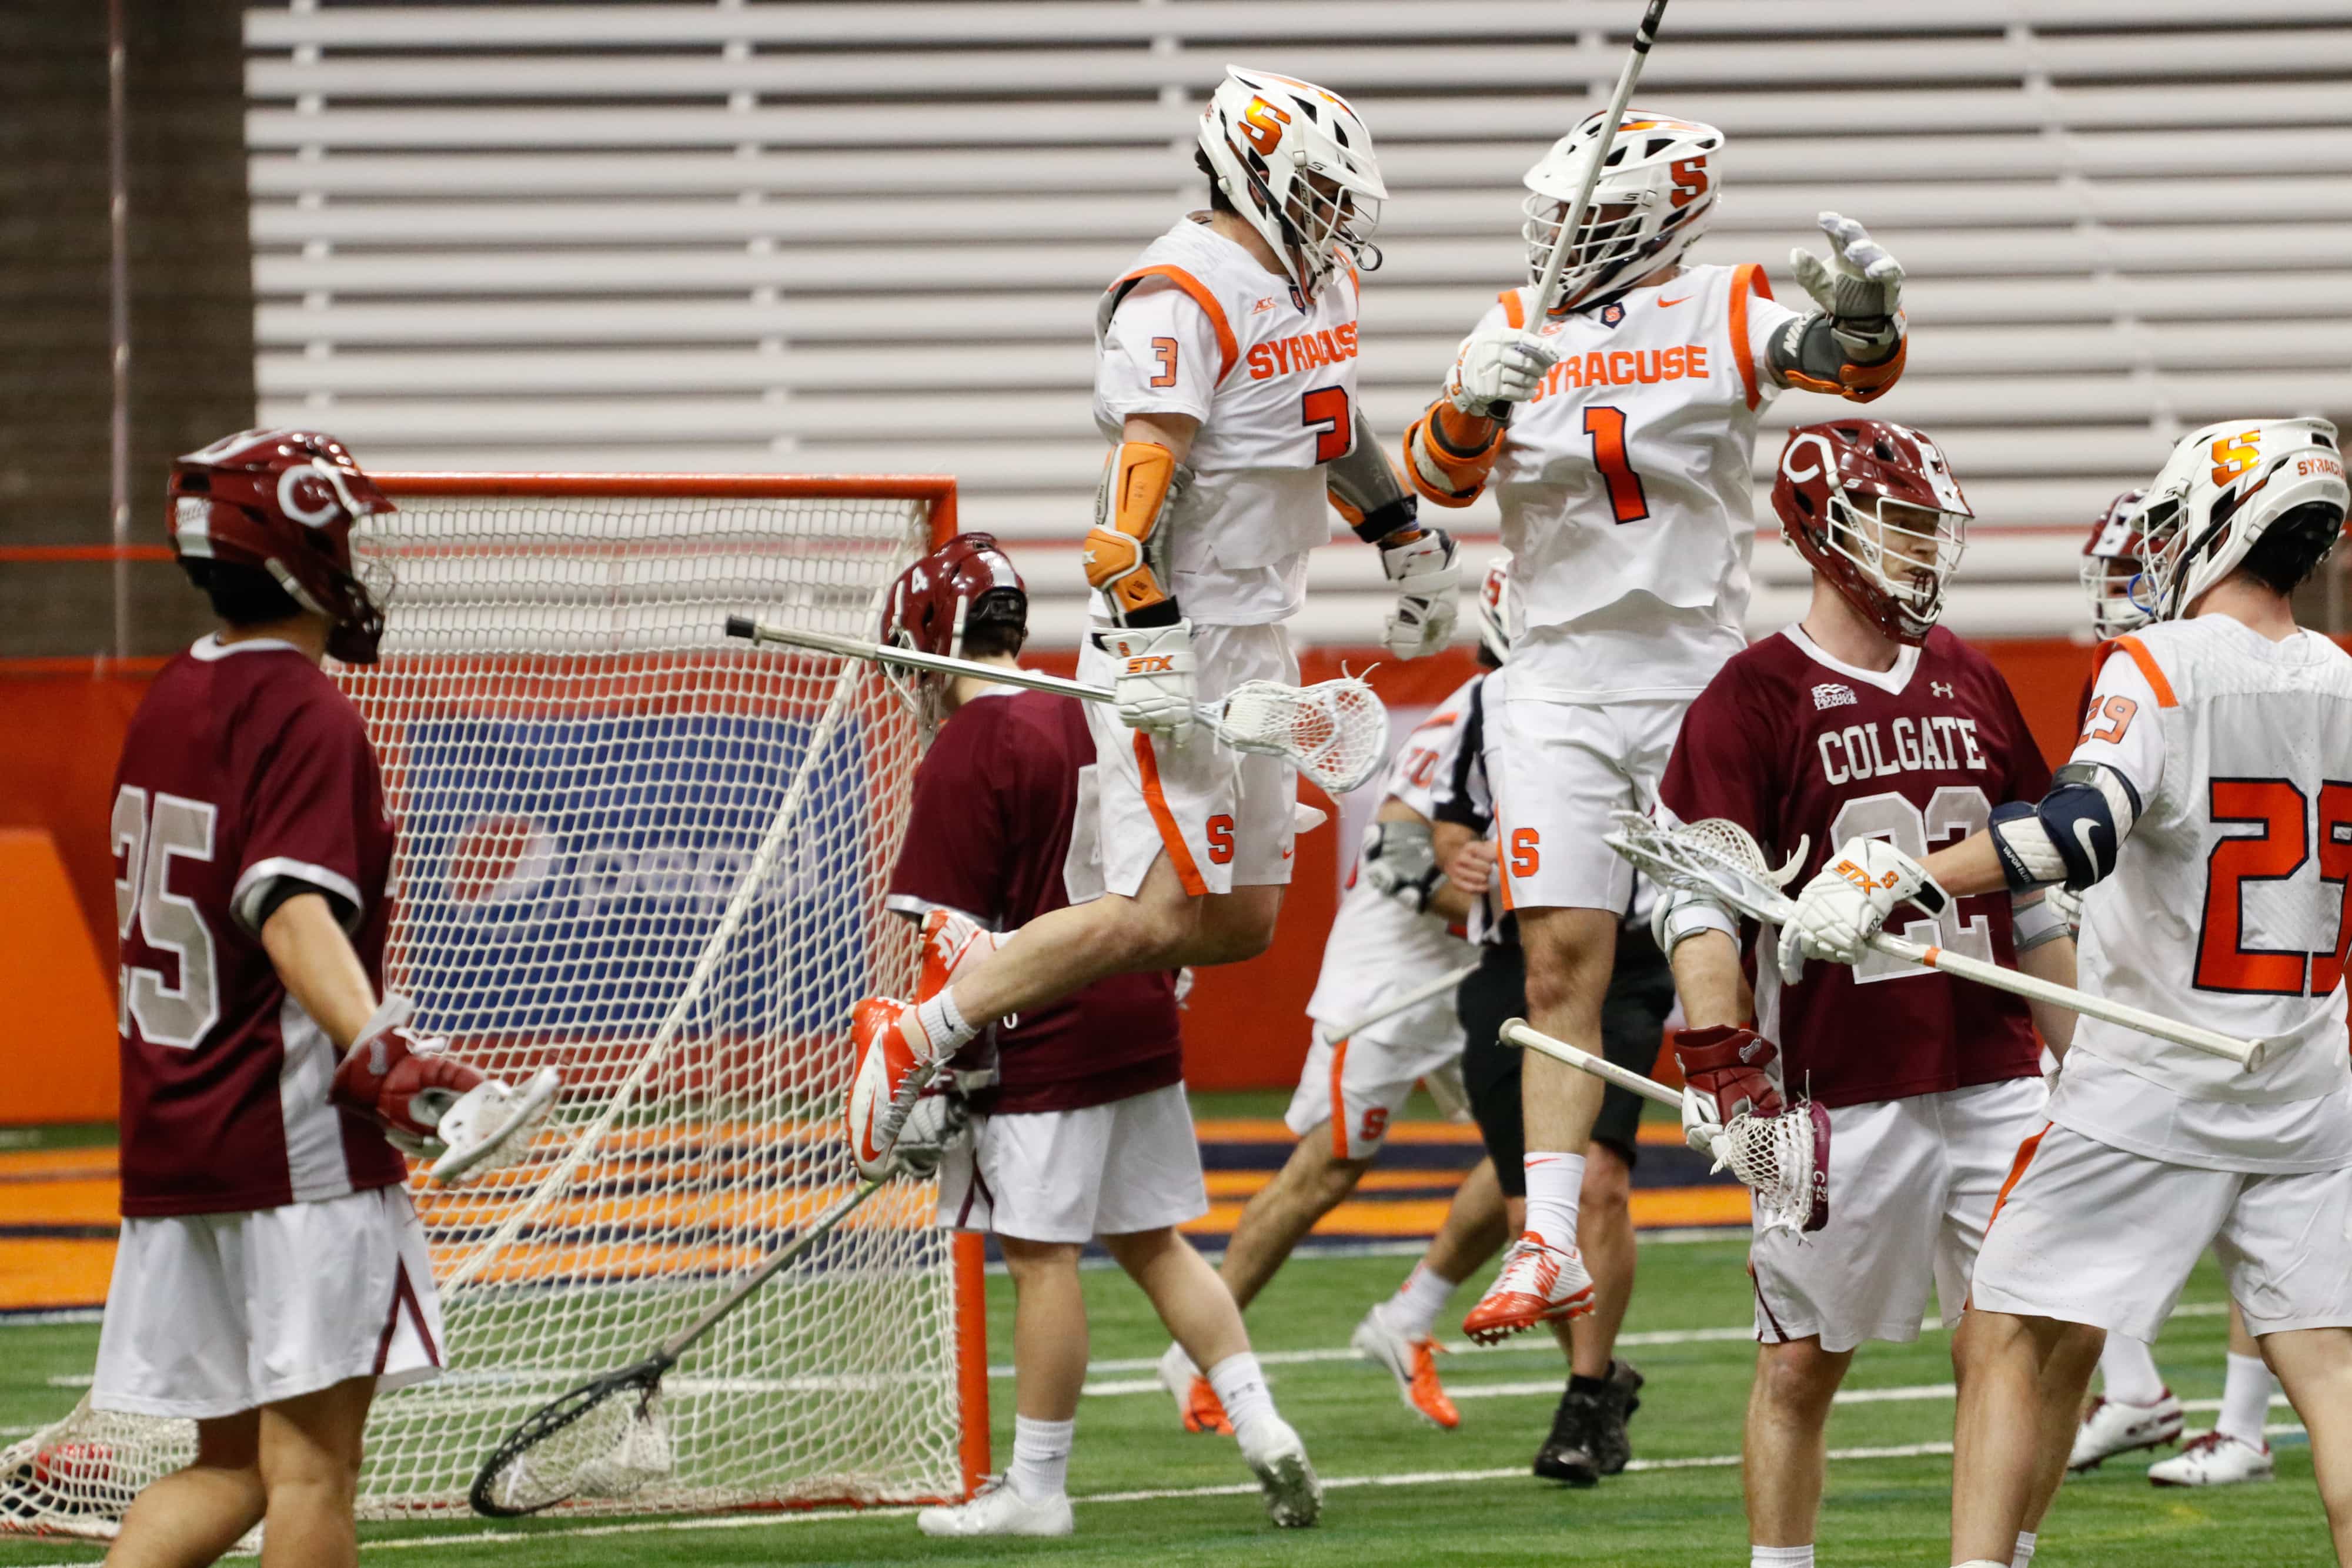 Bradley Voigt and Nate Solomon celebrate after scoring a goal against Colgate in the 2019 season opener in the Carrier Dome.